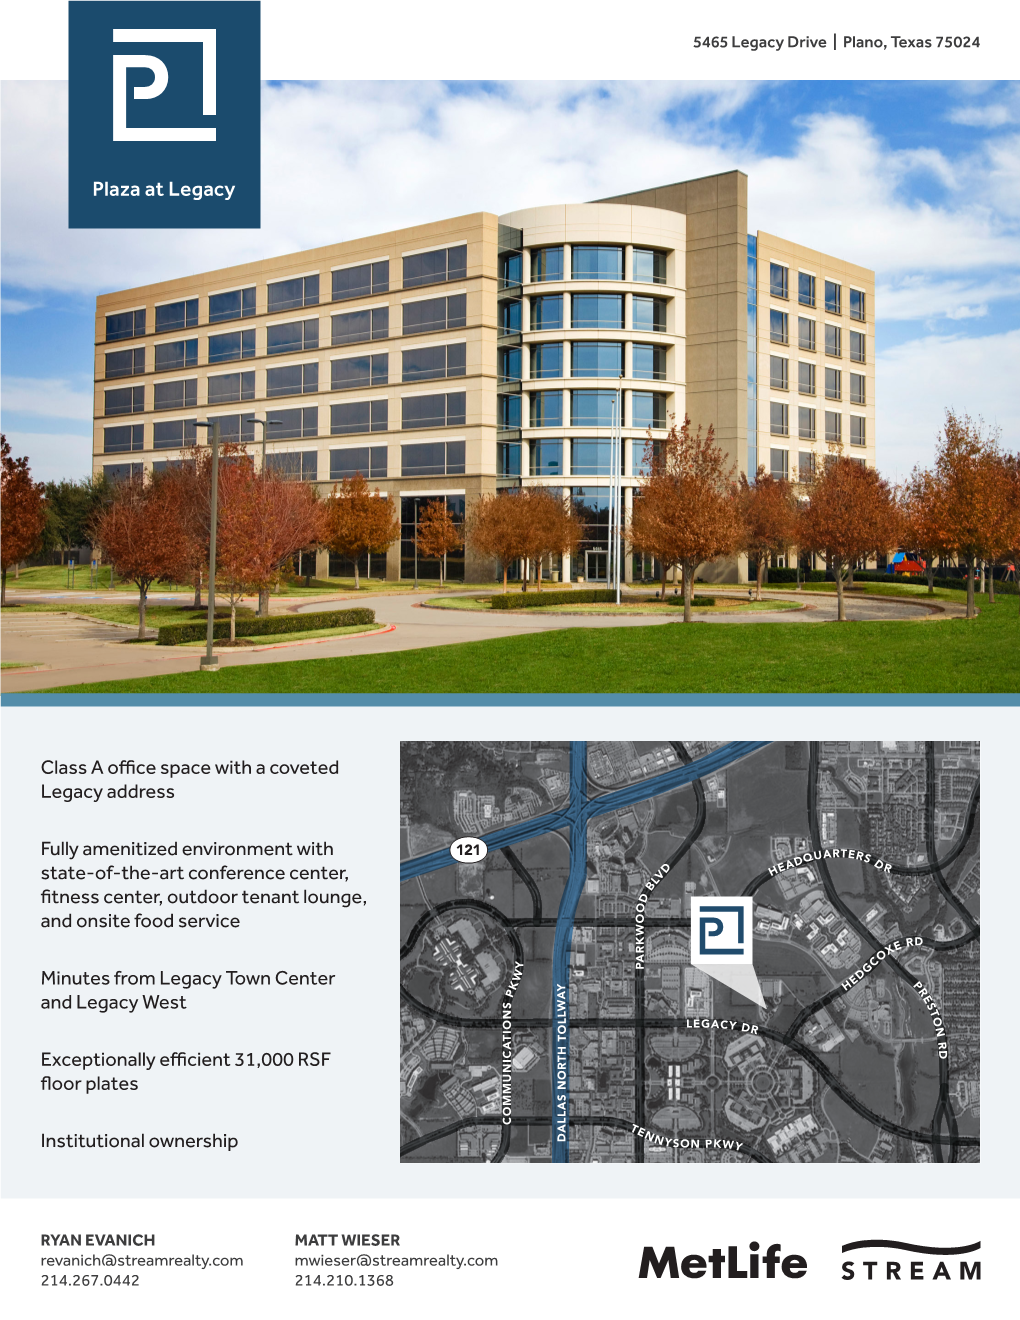 Class a Office Space with a Coveted Legacy Address Fully Amenitized